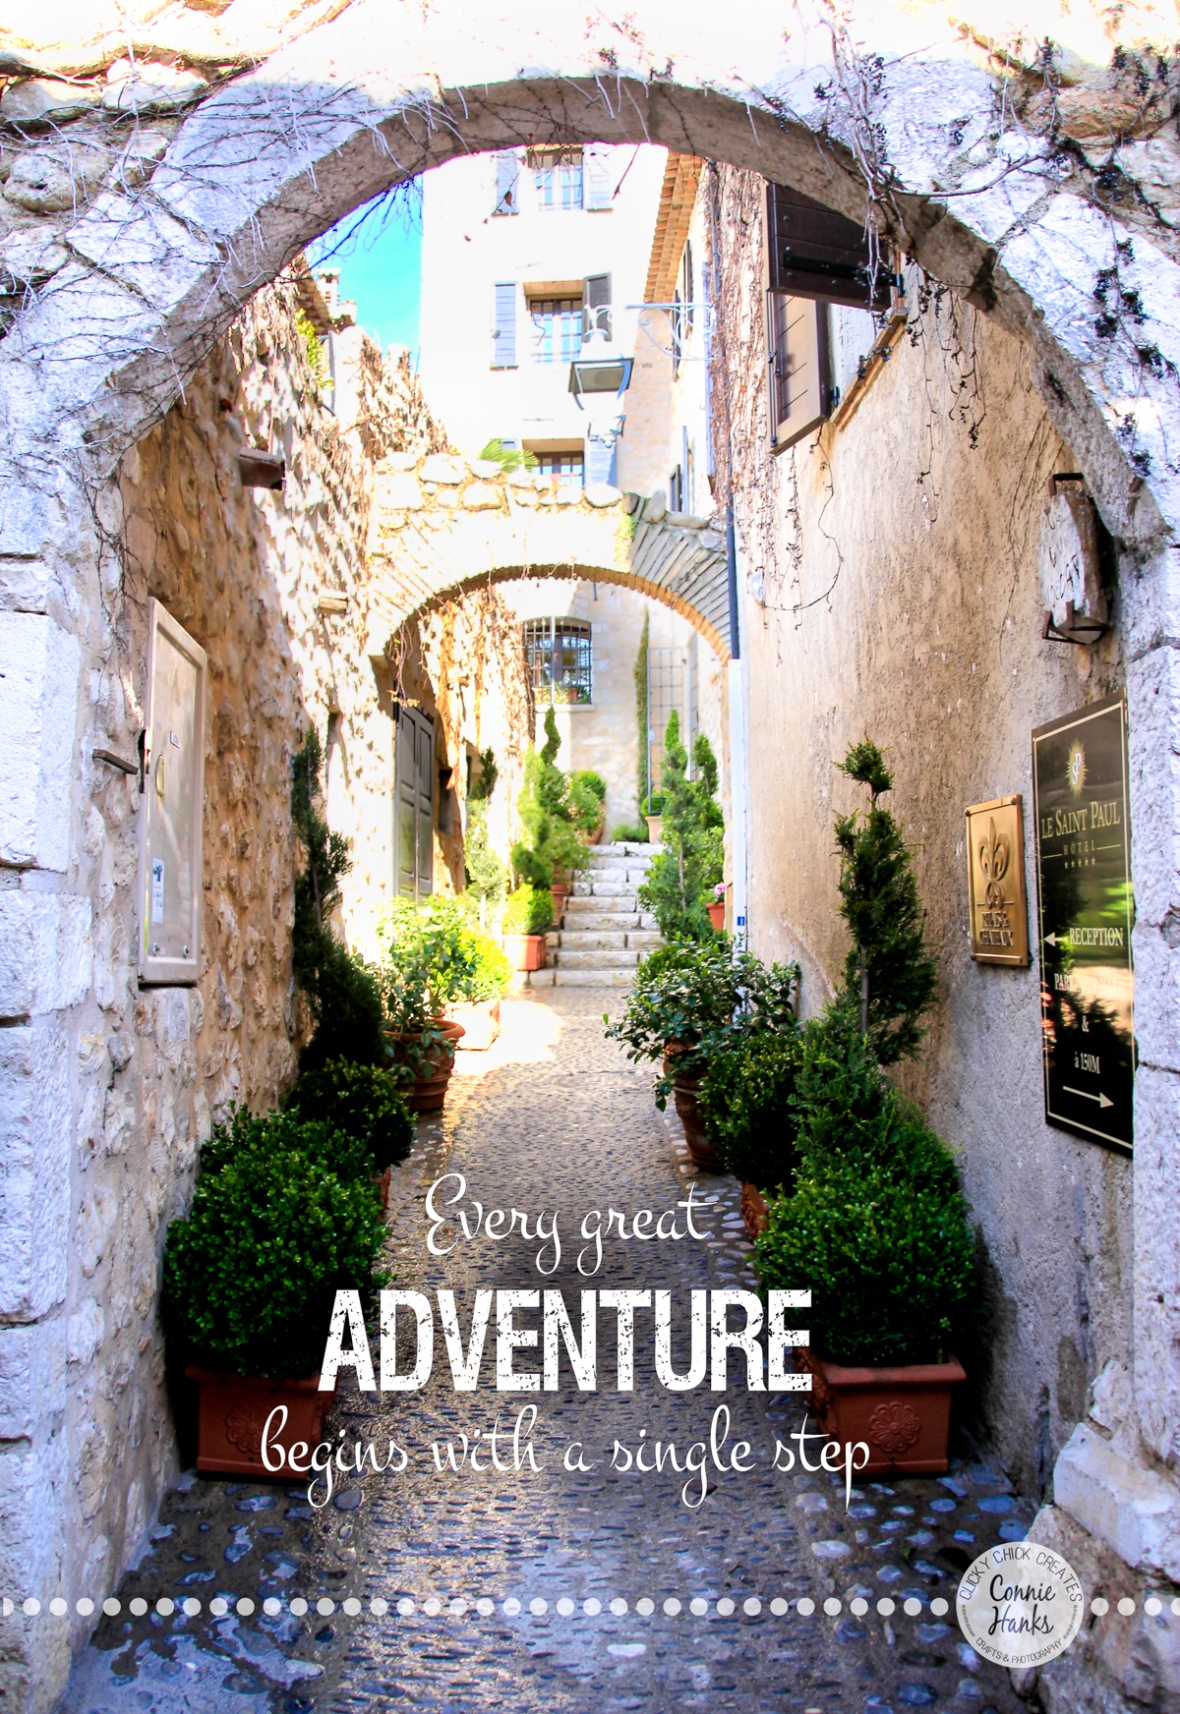 Connie Hanks Photography // ClickyChickCreates.com // Every great Adventure begins with a single step, St Paul, France, medieval village